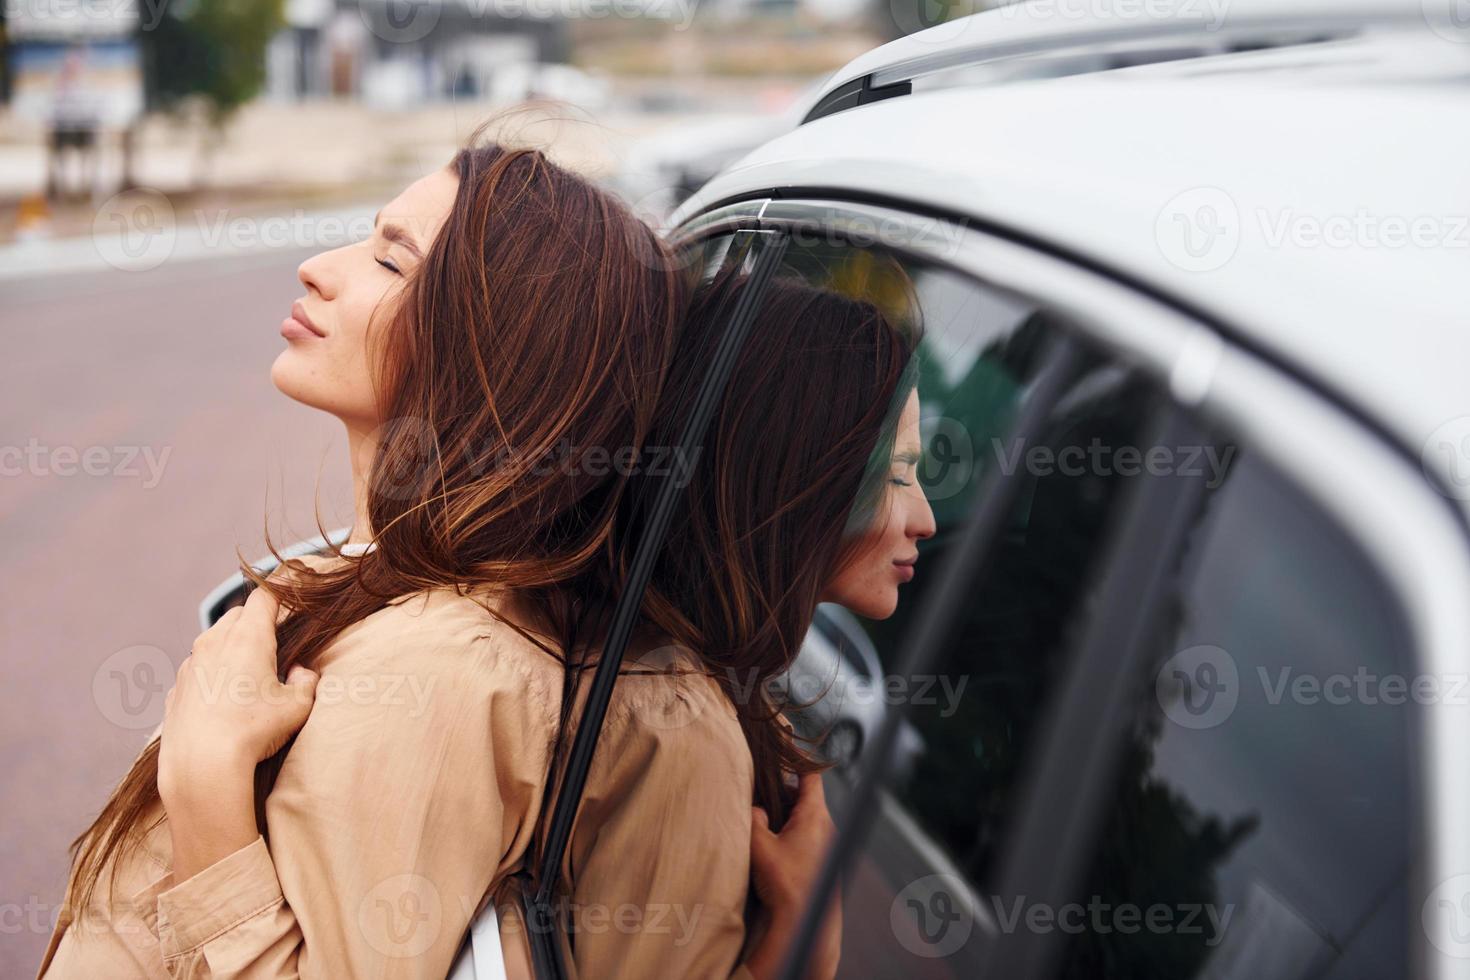 Leans on the door. Fashionable beautiful young woman and her modern automobile photo